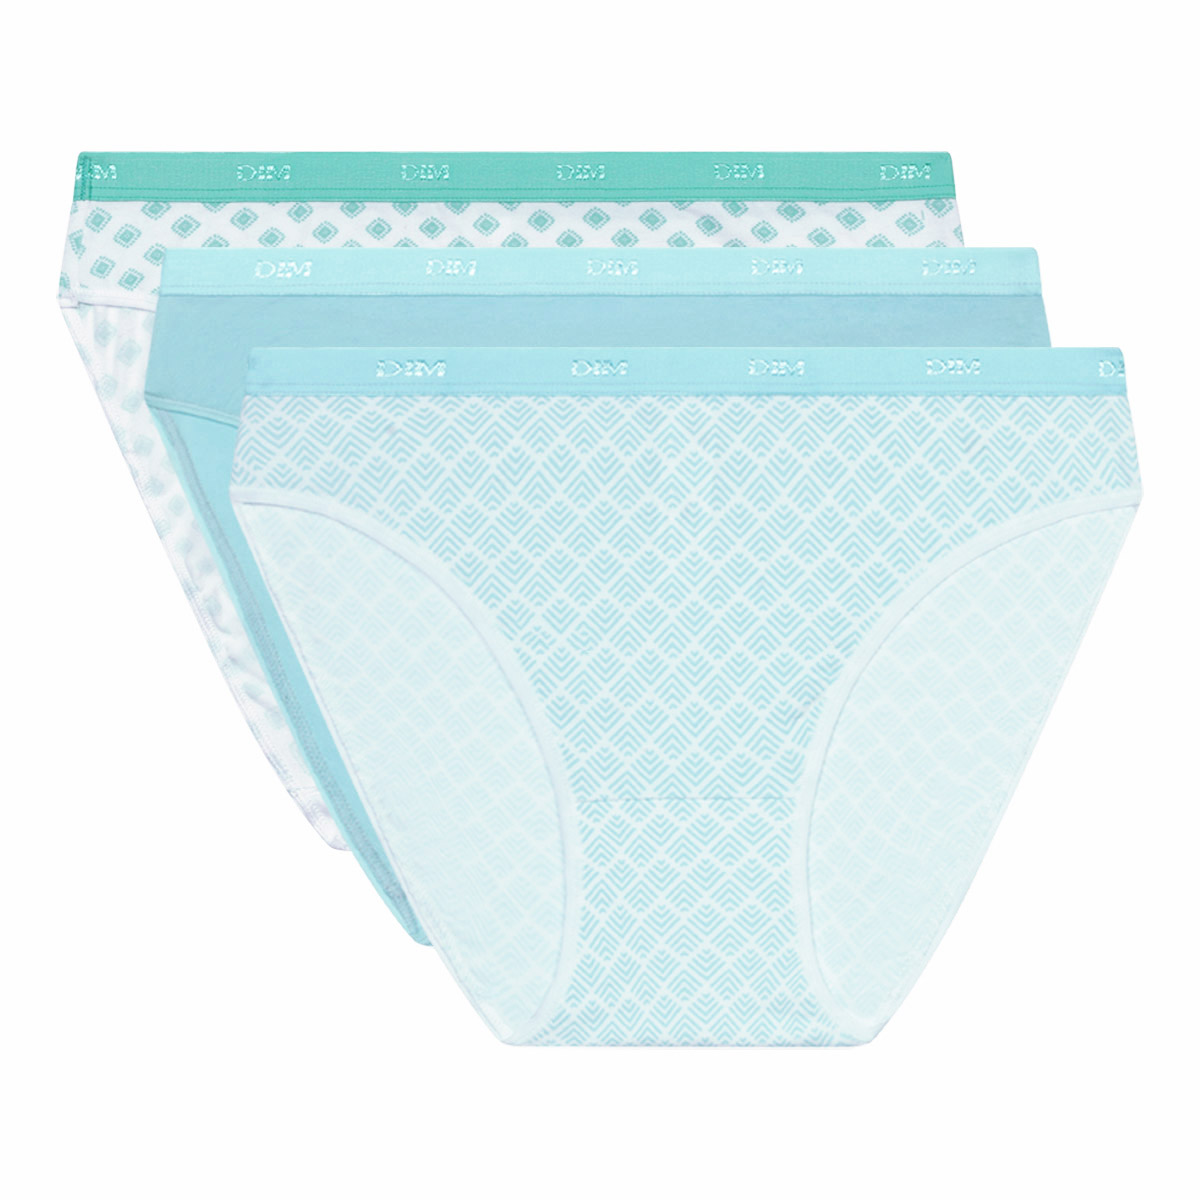 Pack of 3 blue stretch cotton briefs with geometric patterns Les